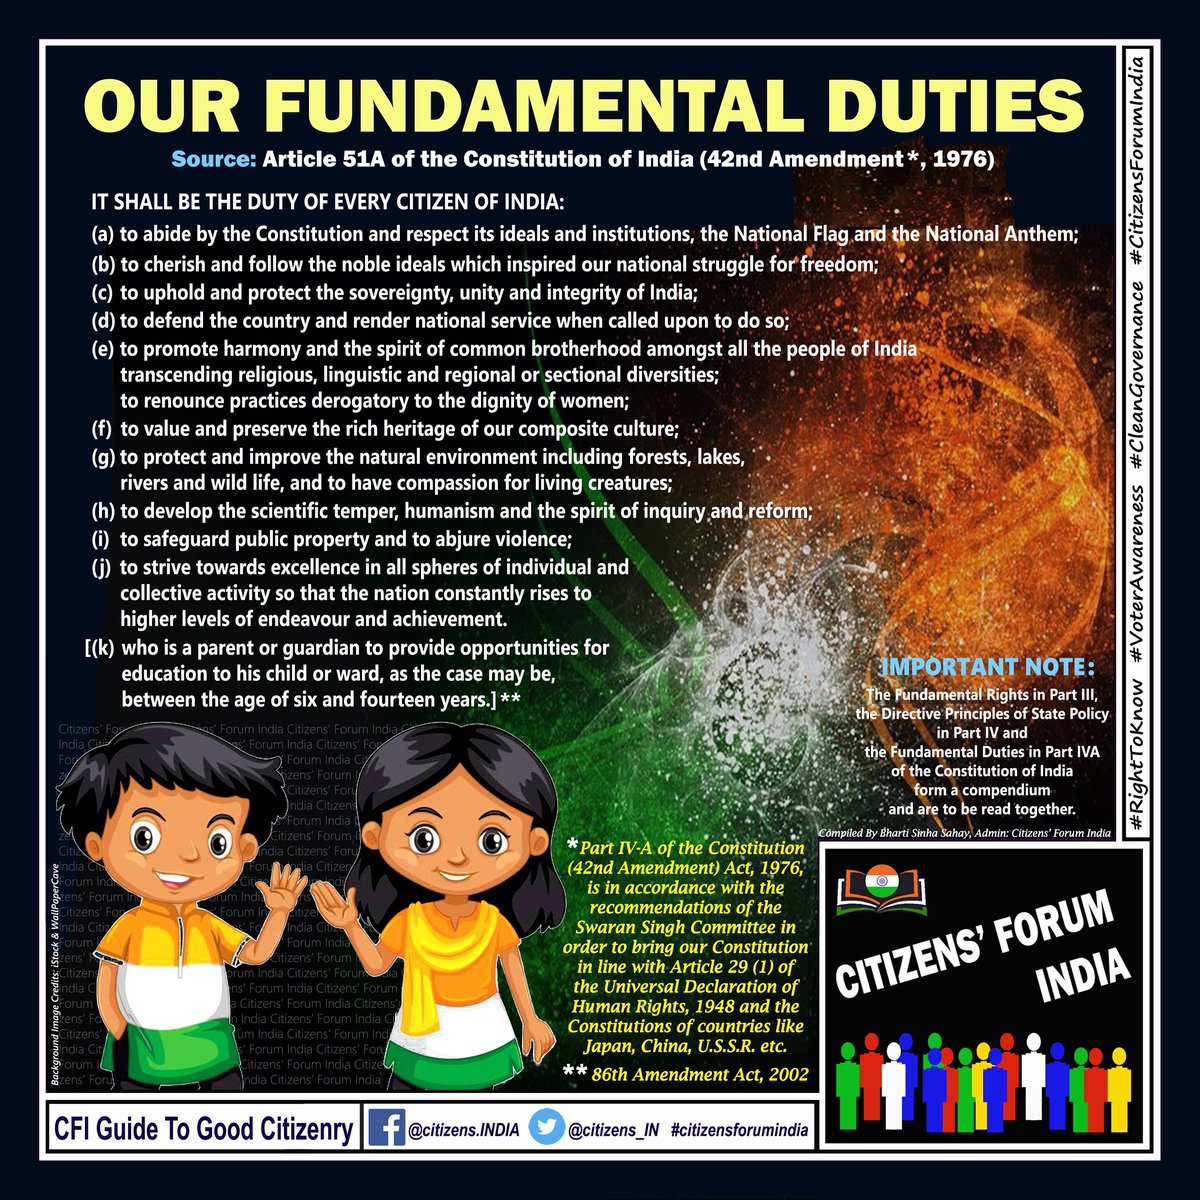 Newest For Poster On Fundamental Duties Of India - Align ...